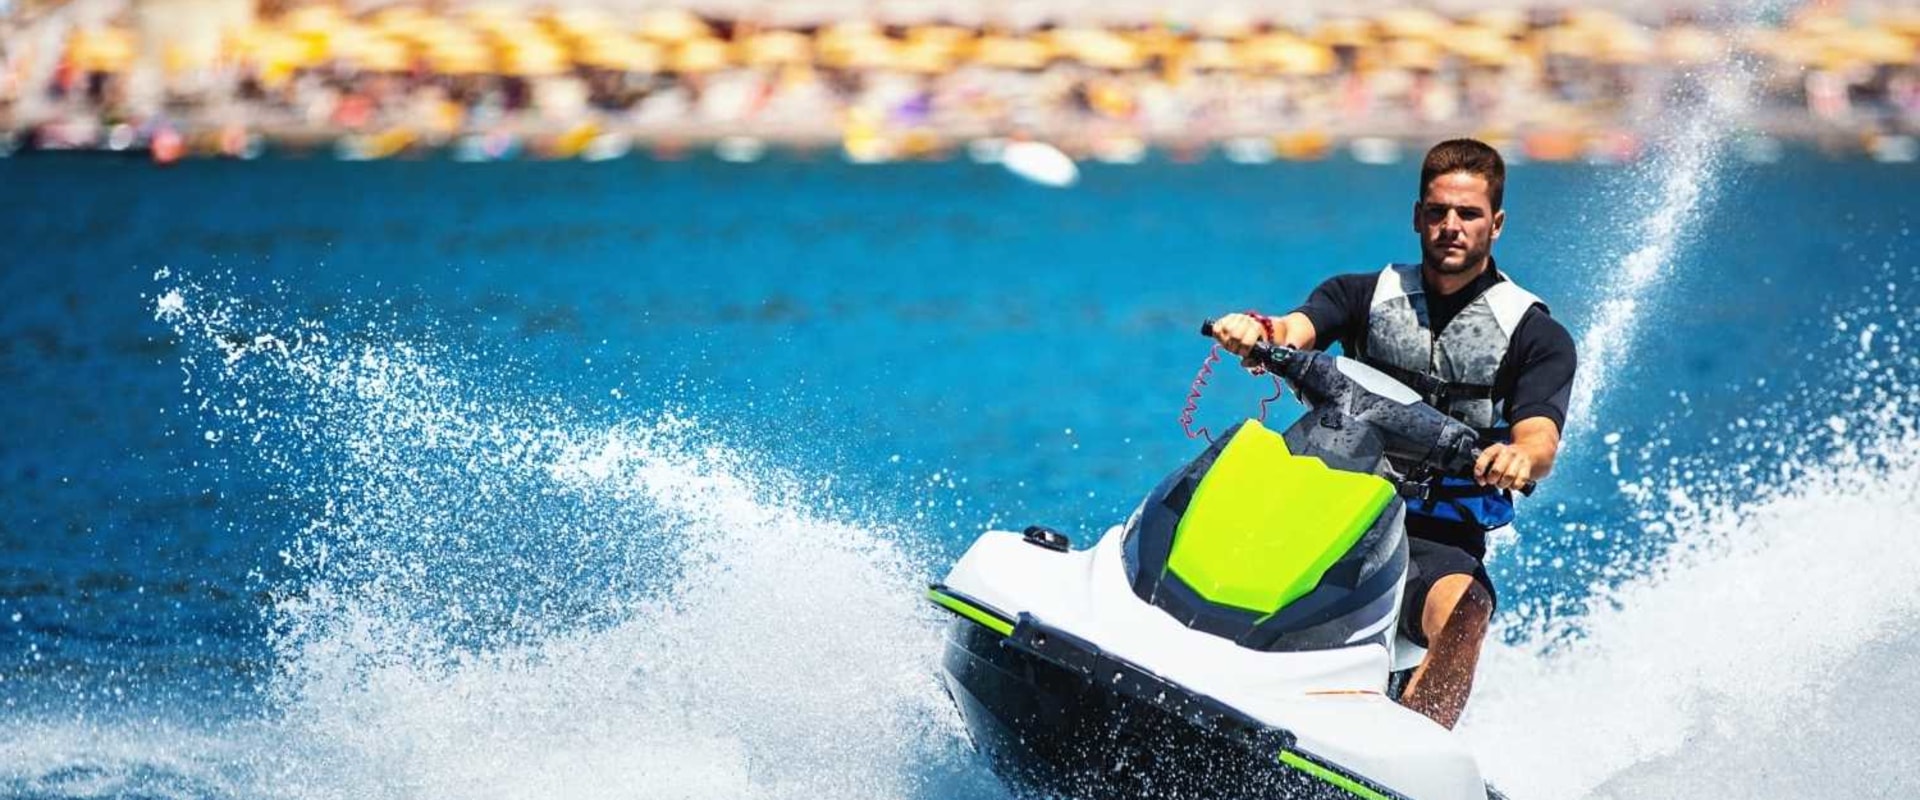 What is jet ski ride?